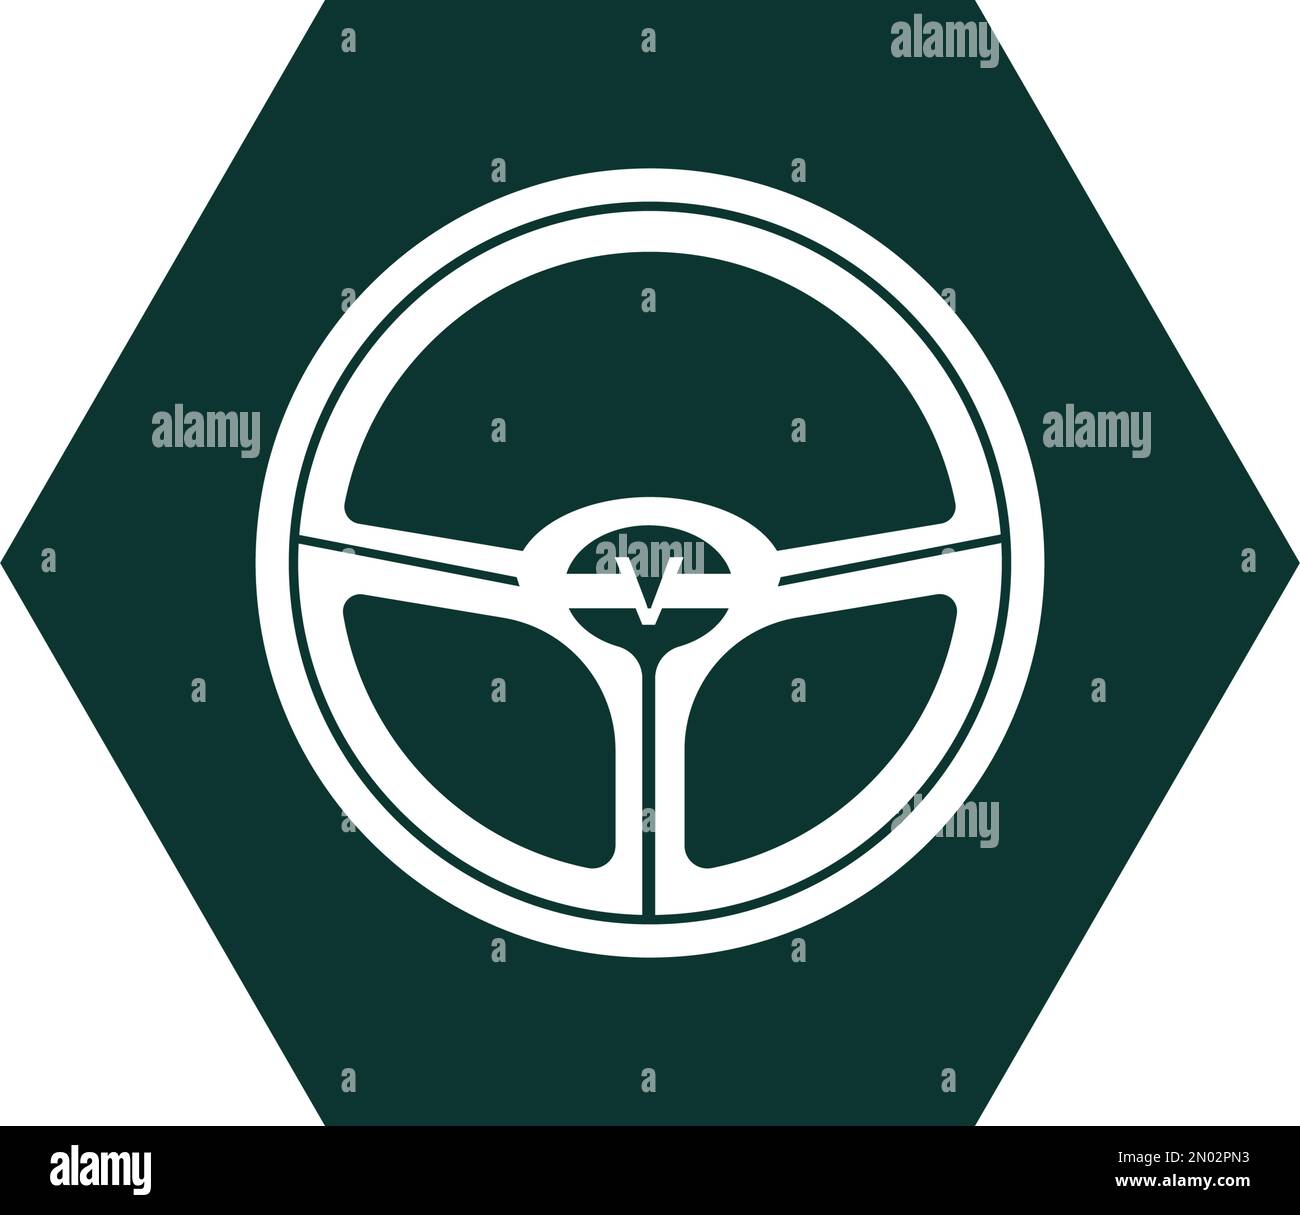 steering wheel logo vector design illustration template and background Stock Vector